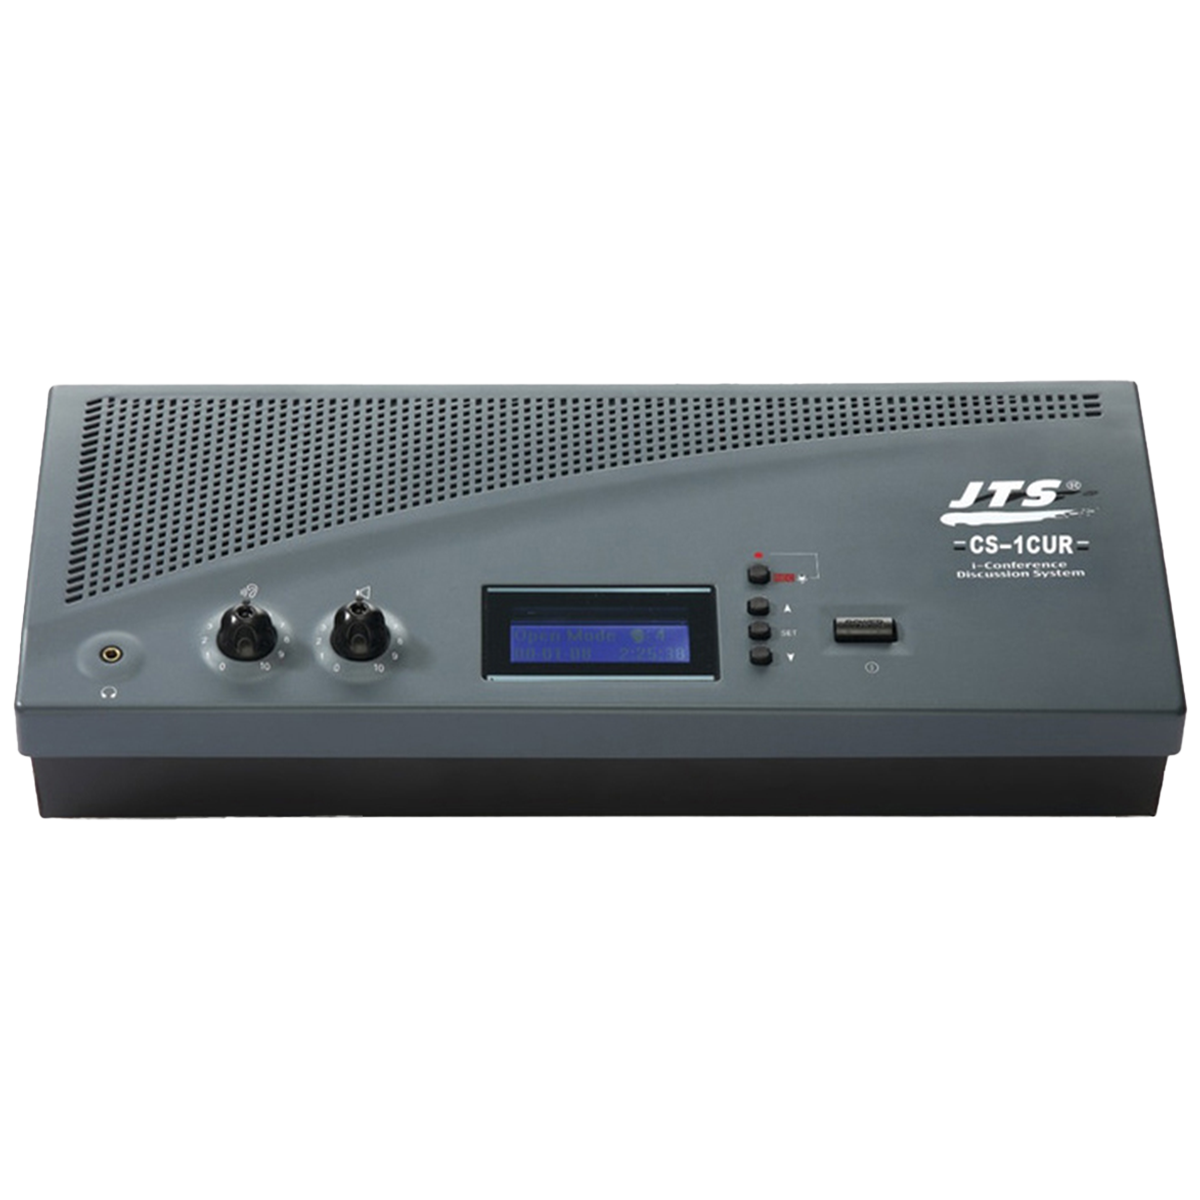 JTS CS-1CUR conference control unit with USB recording facility